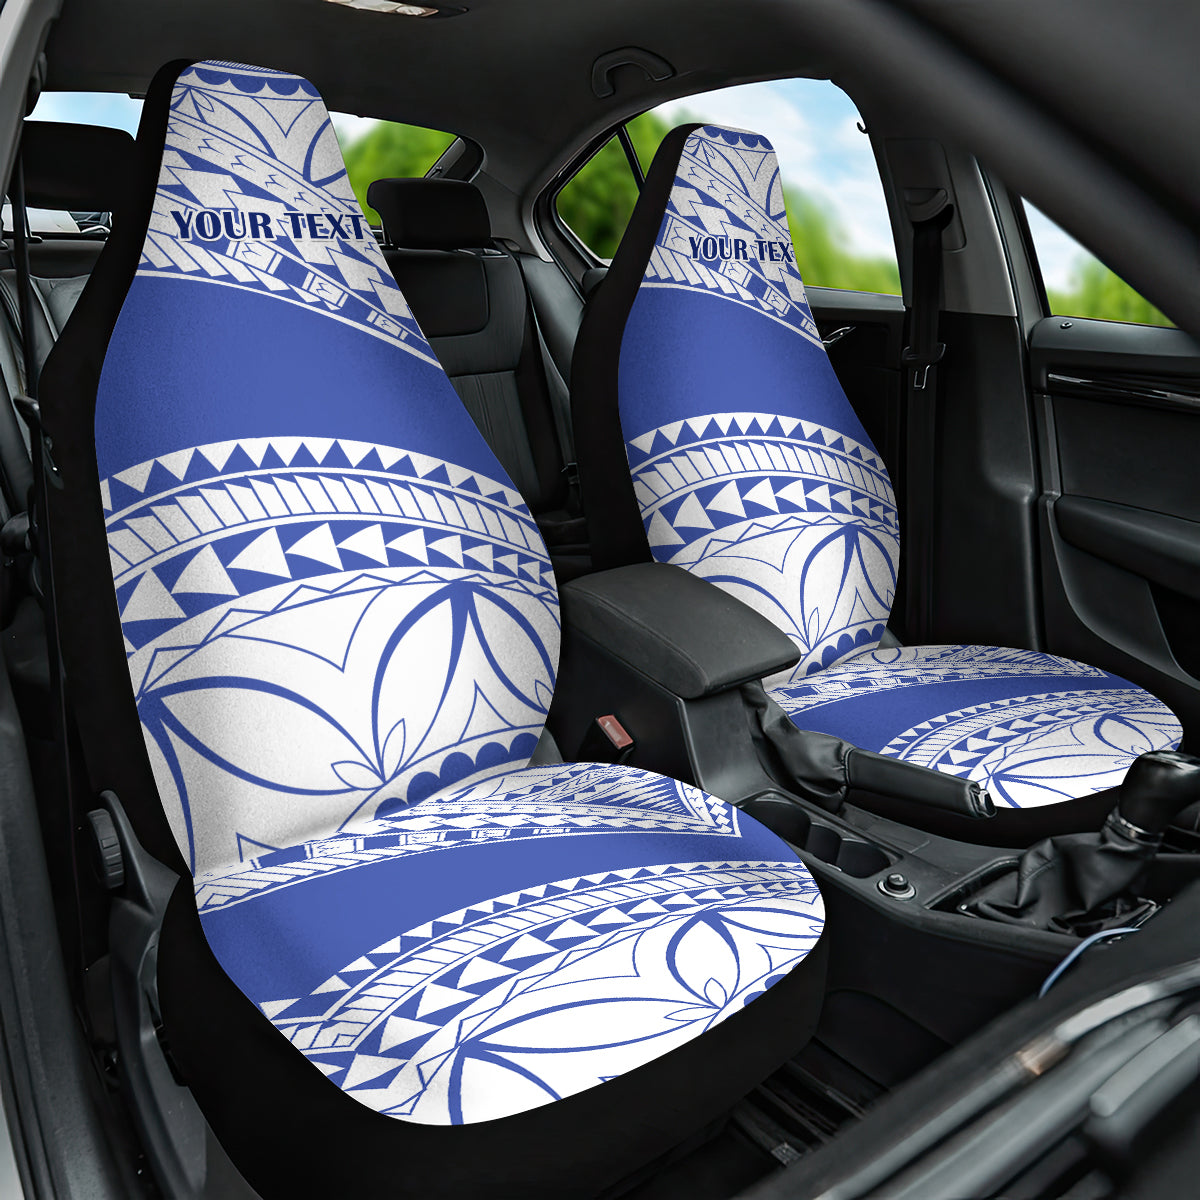 Personalised Samoa St Josephs College Car Seat Cover Marist Brothers Samoan Pattern LT14 One Size Blue - Polynesian Pride